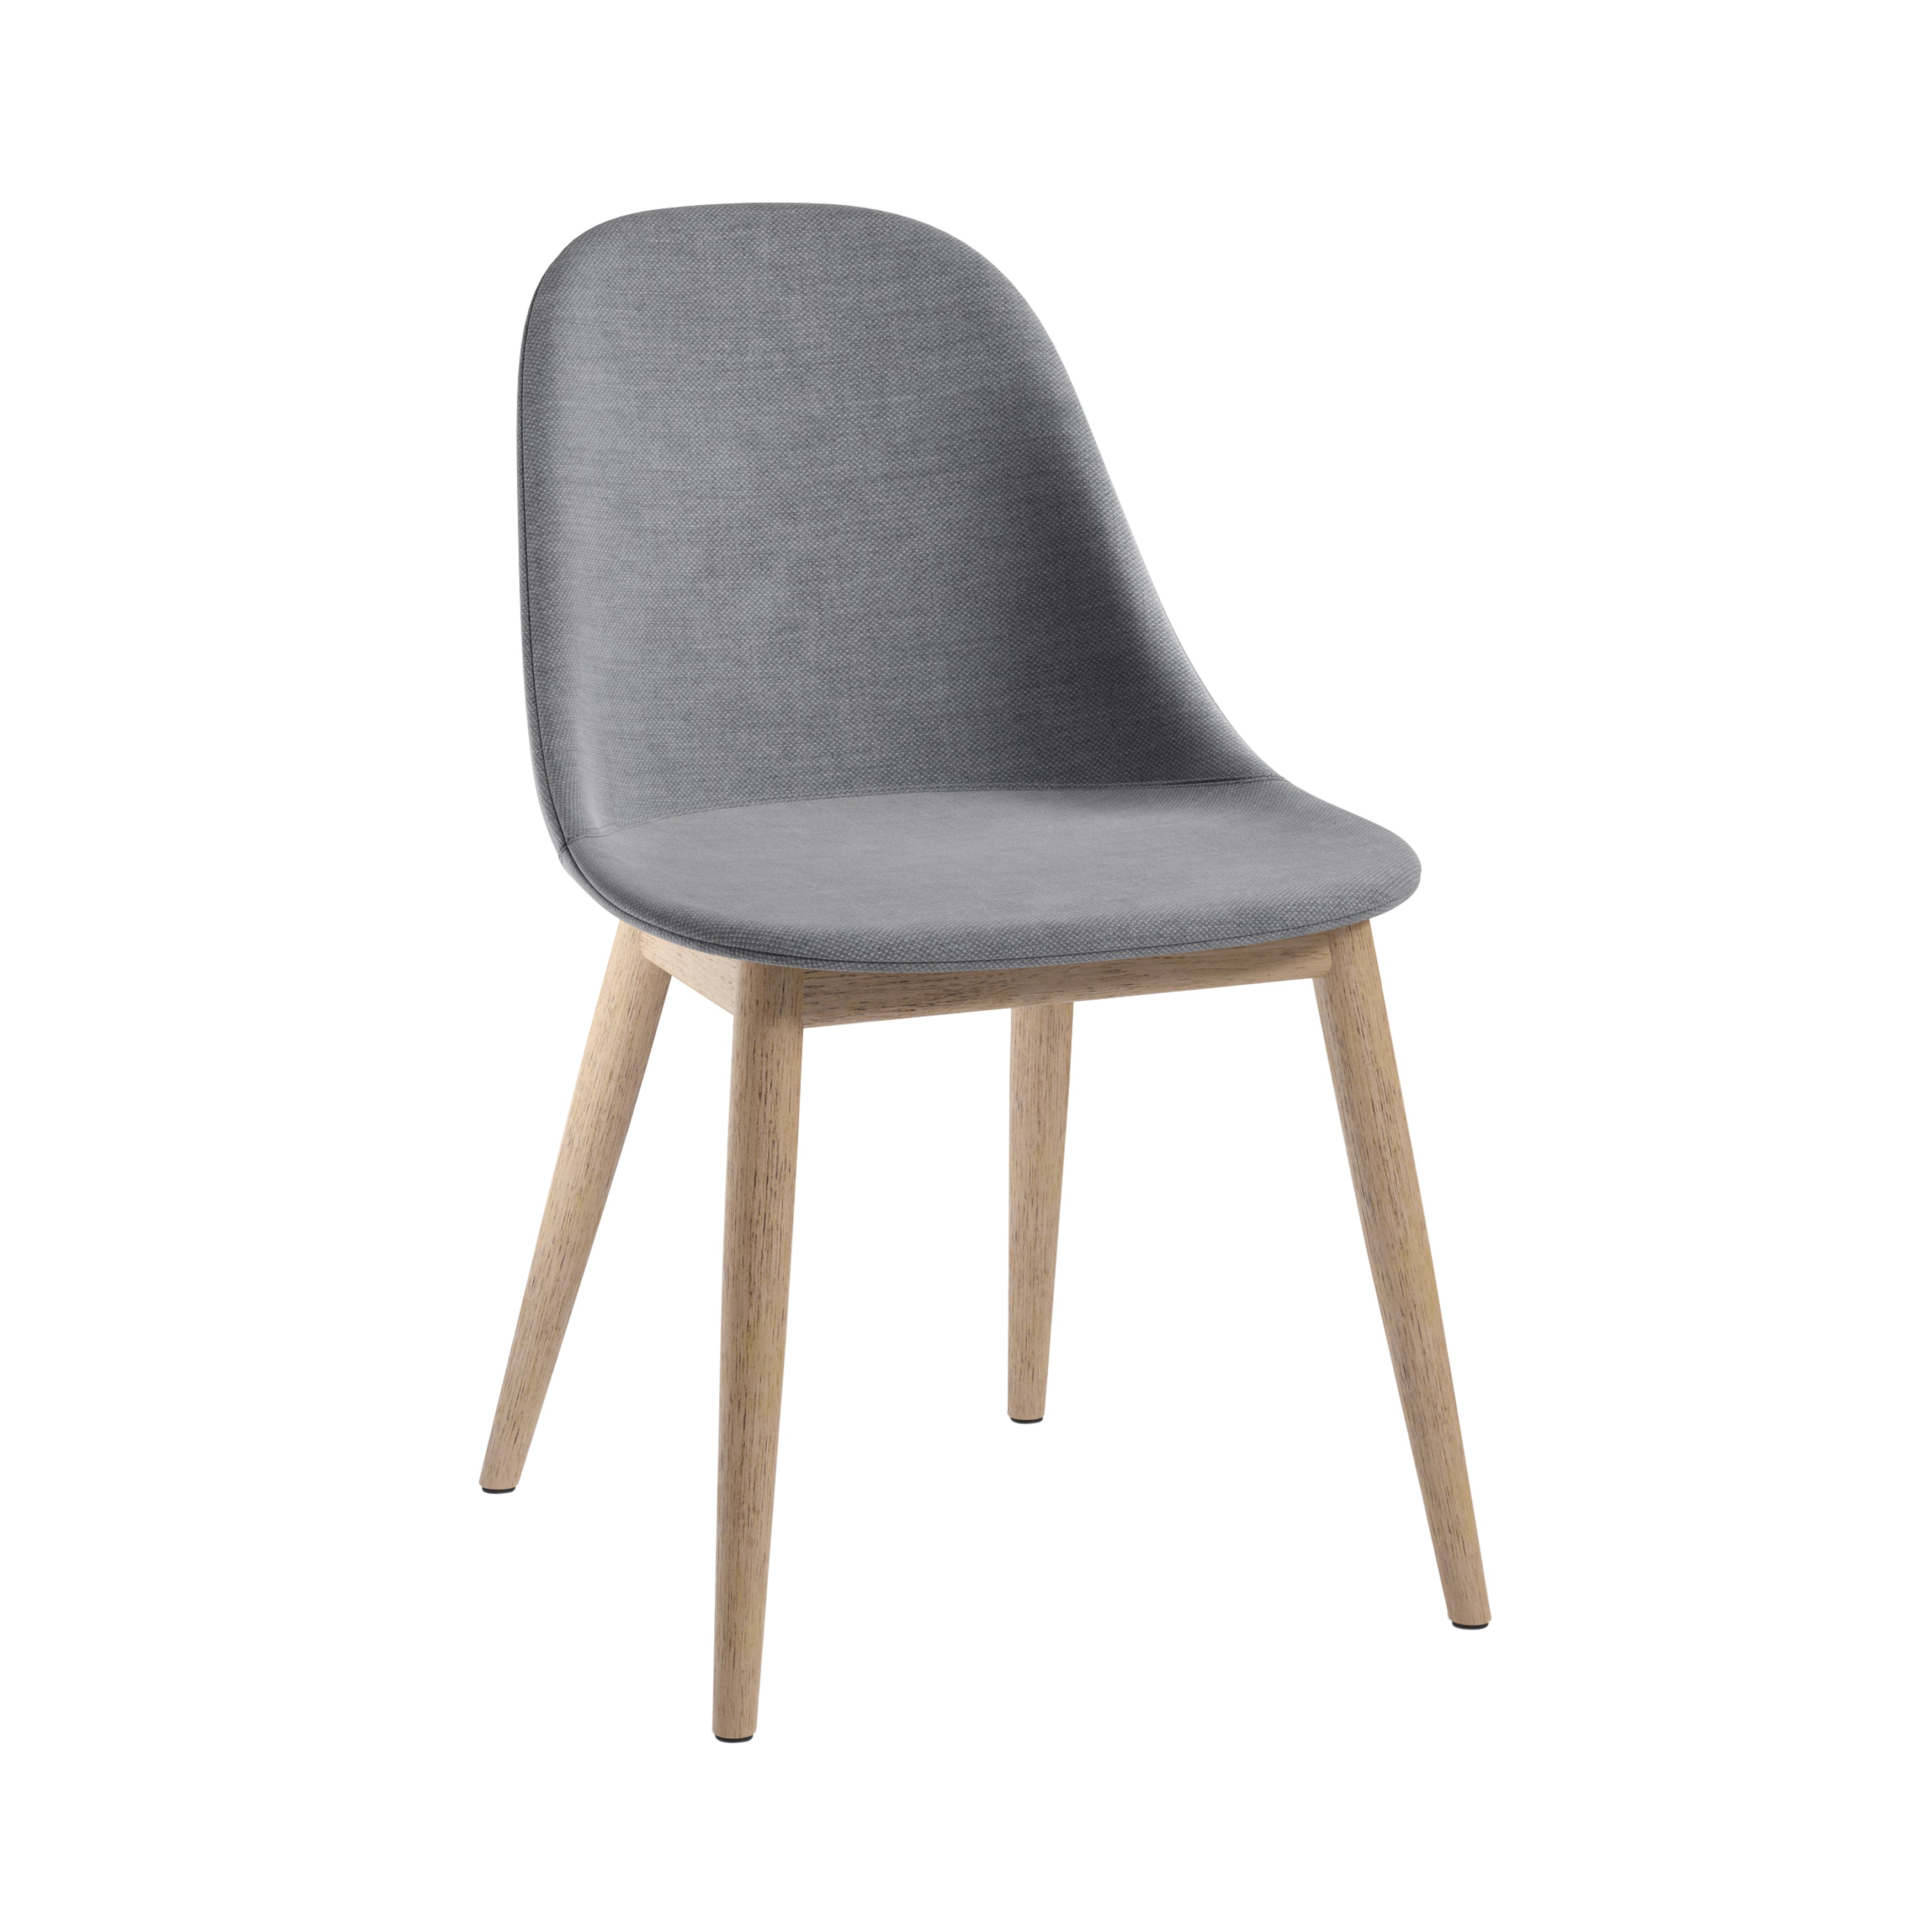 Harbour Side Chair: Wood Base Upholstered + Natural Oak + Fiord2 751